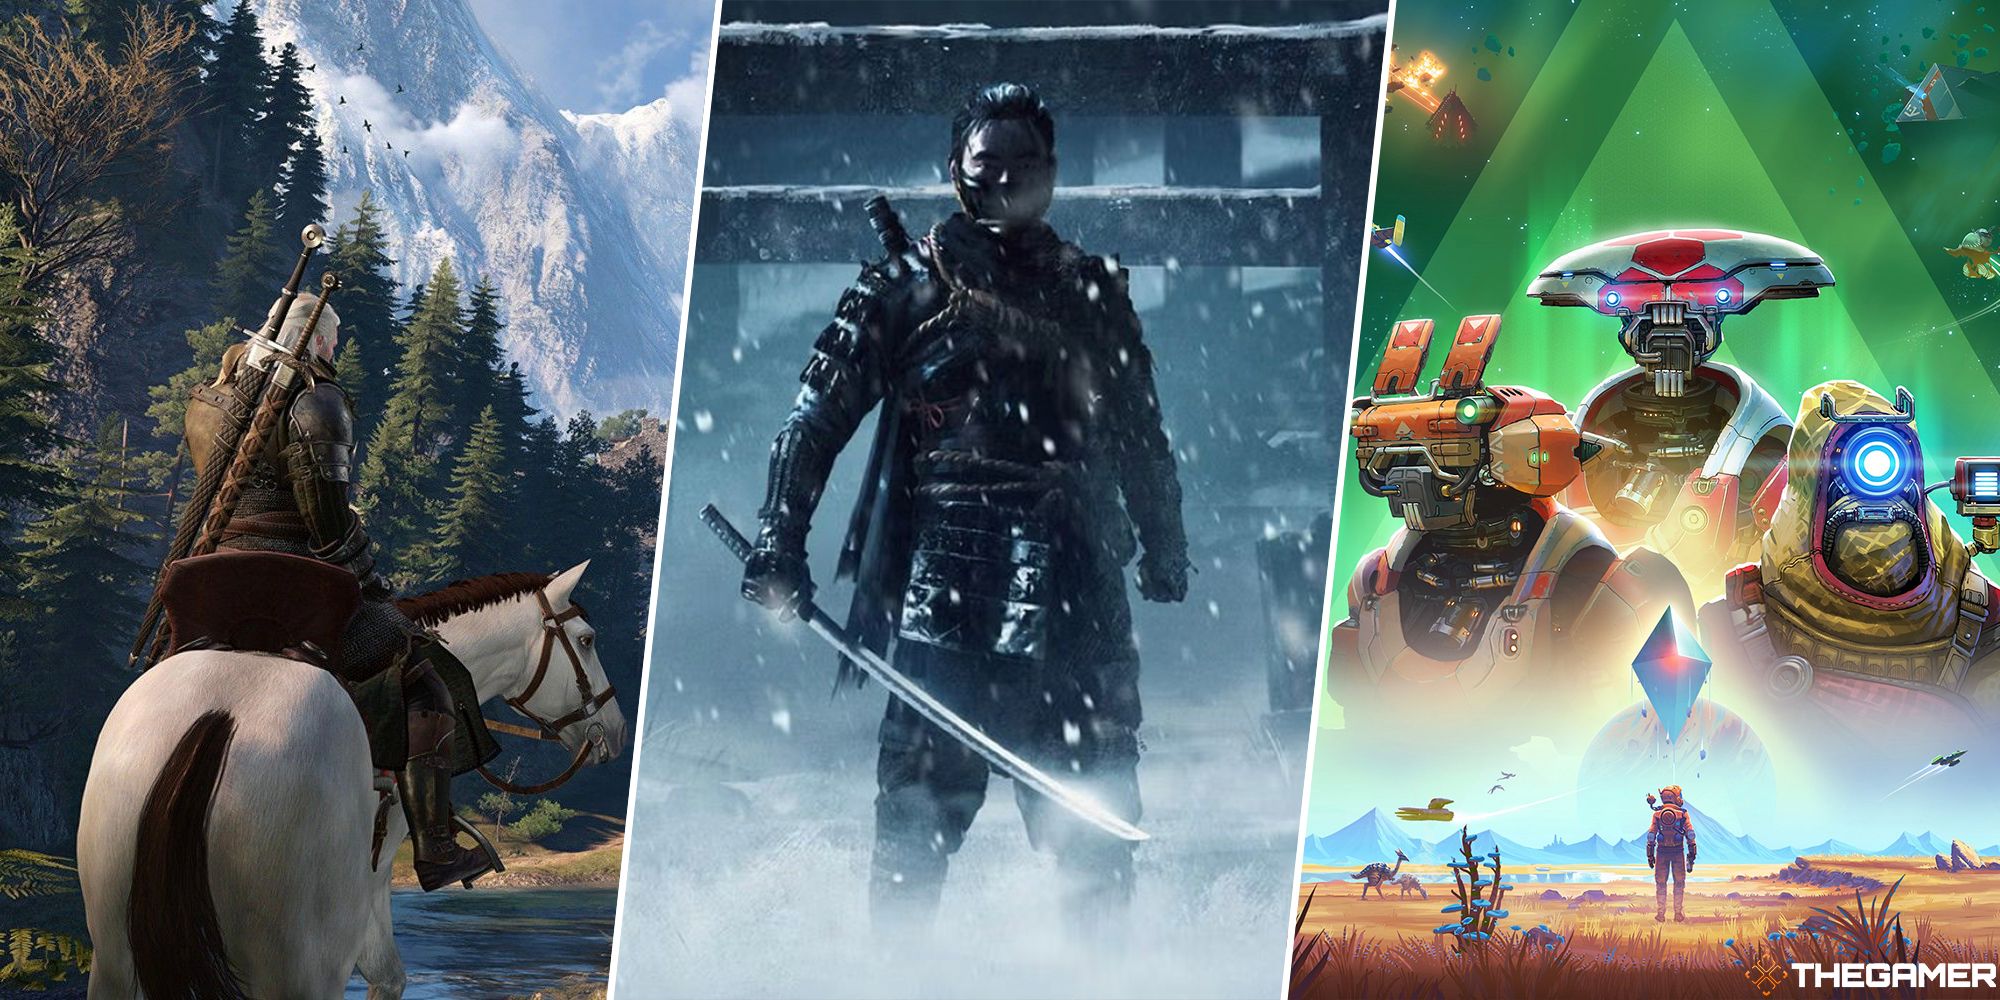 the witcher 3, ghost of tsushima, and no man's sky split